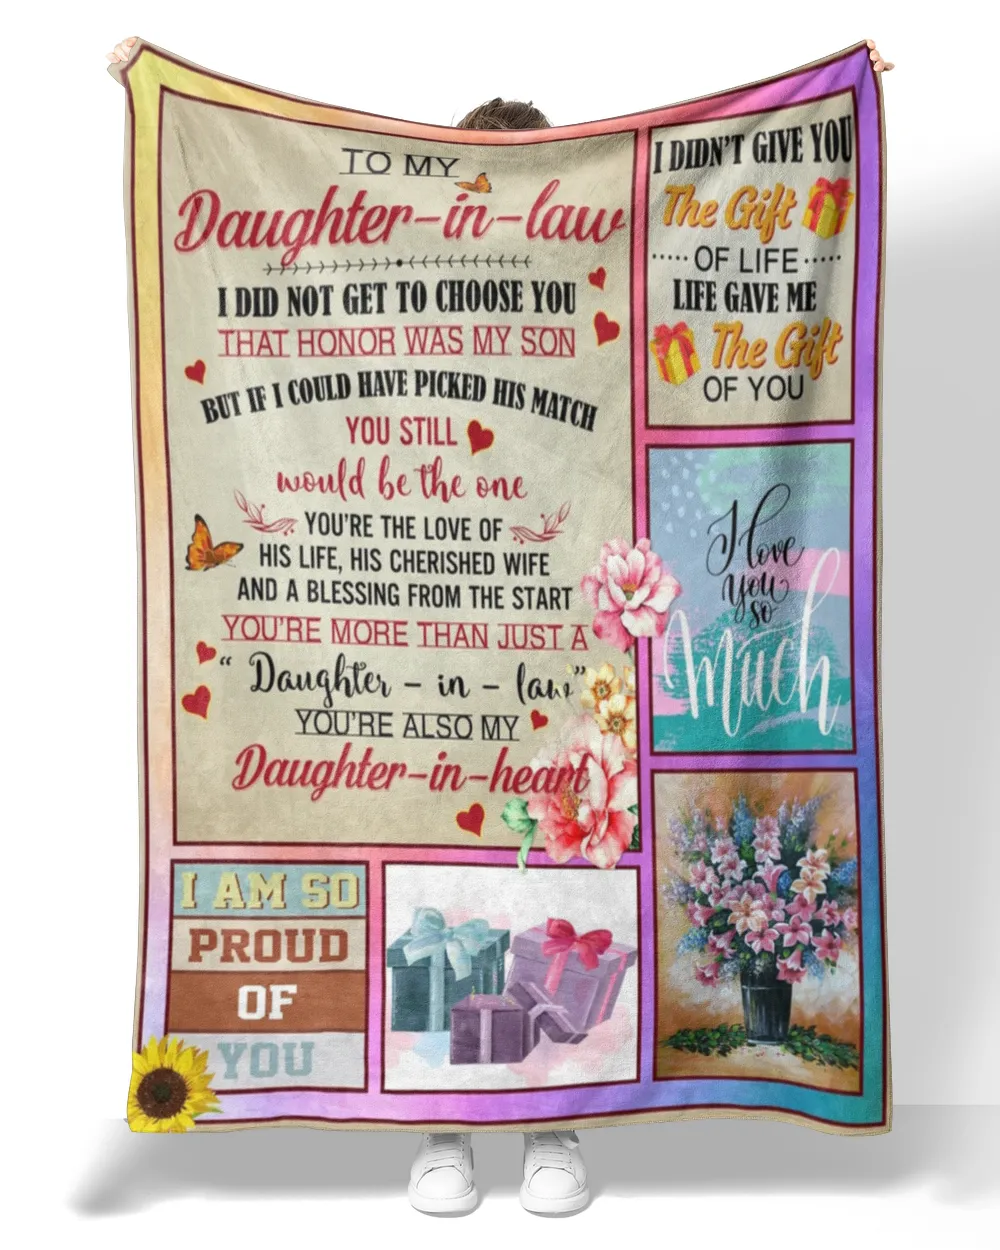 To My Daughter In law I Did Not Get To Choose You That Honor Was My Son's - Daughter In Law Blanket